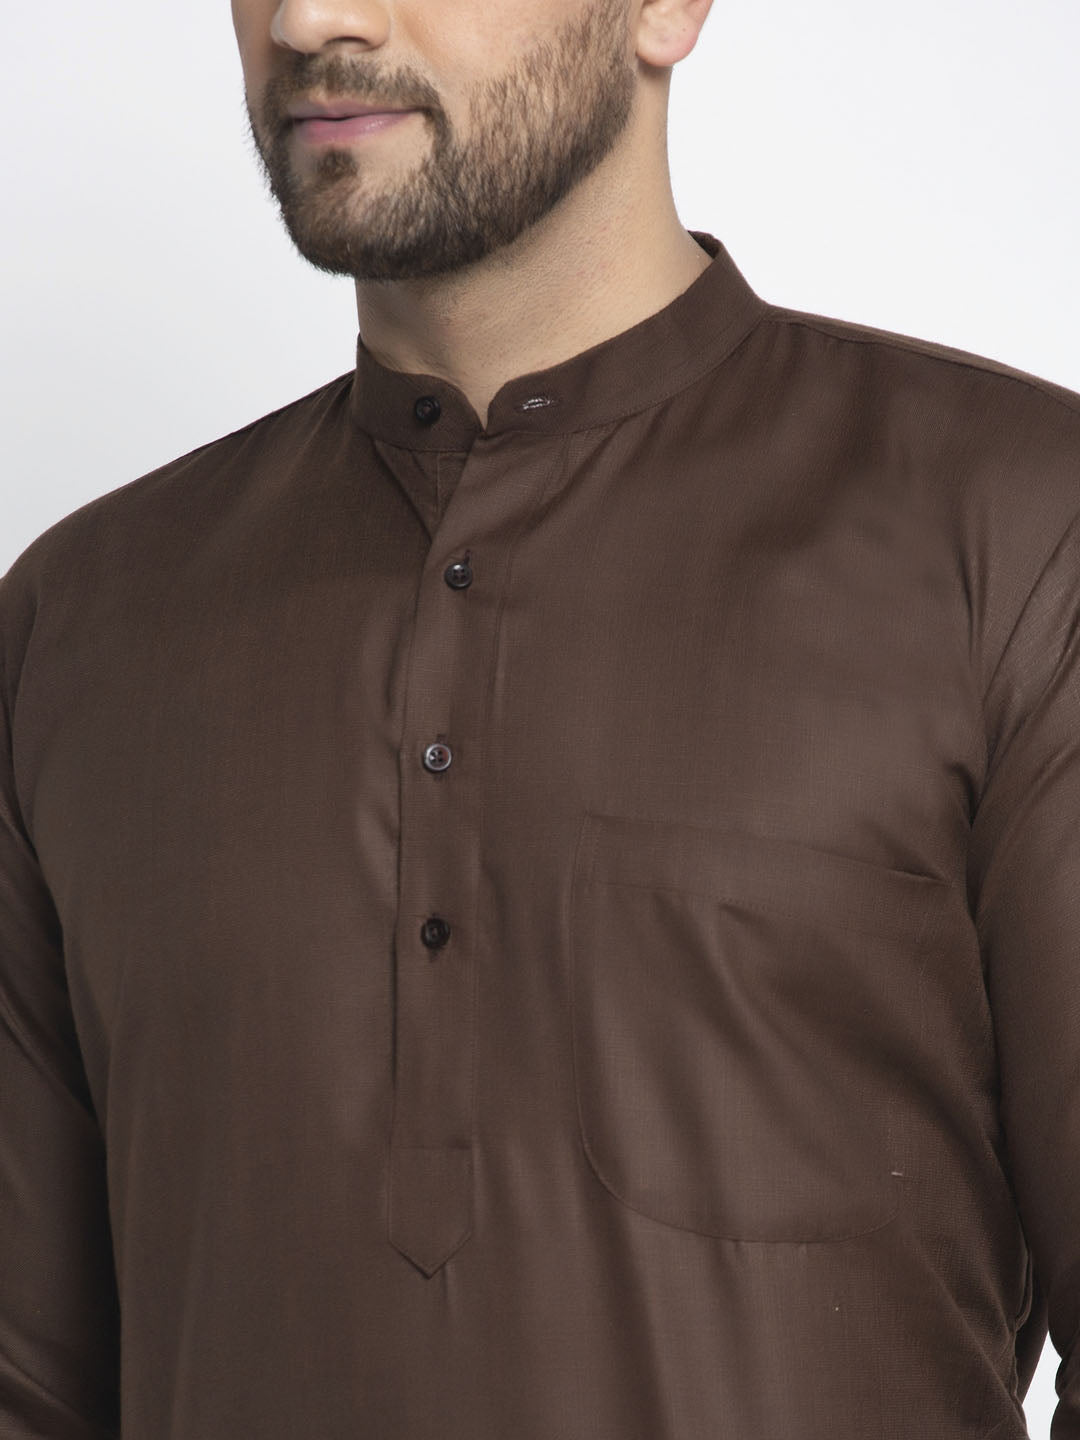 Jompers Men's Coffee Cotton Solid Kurta Only